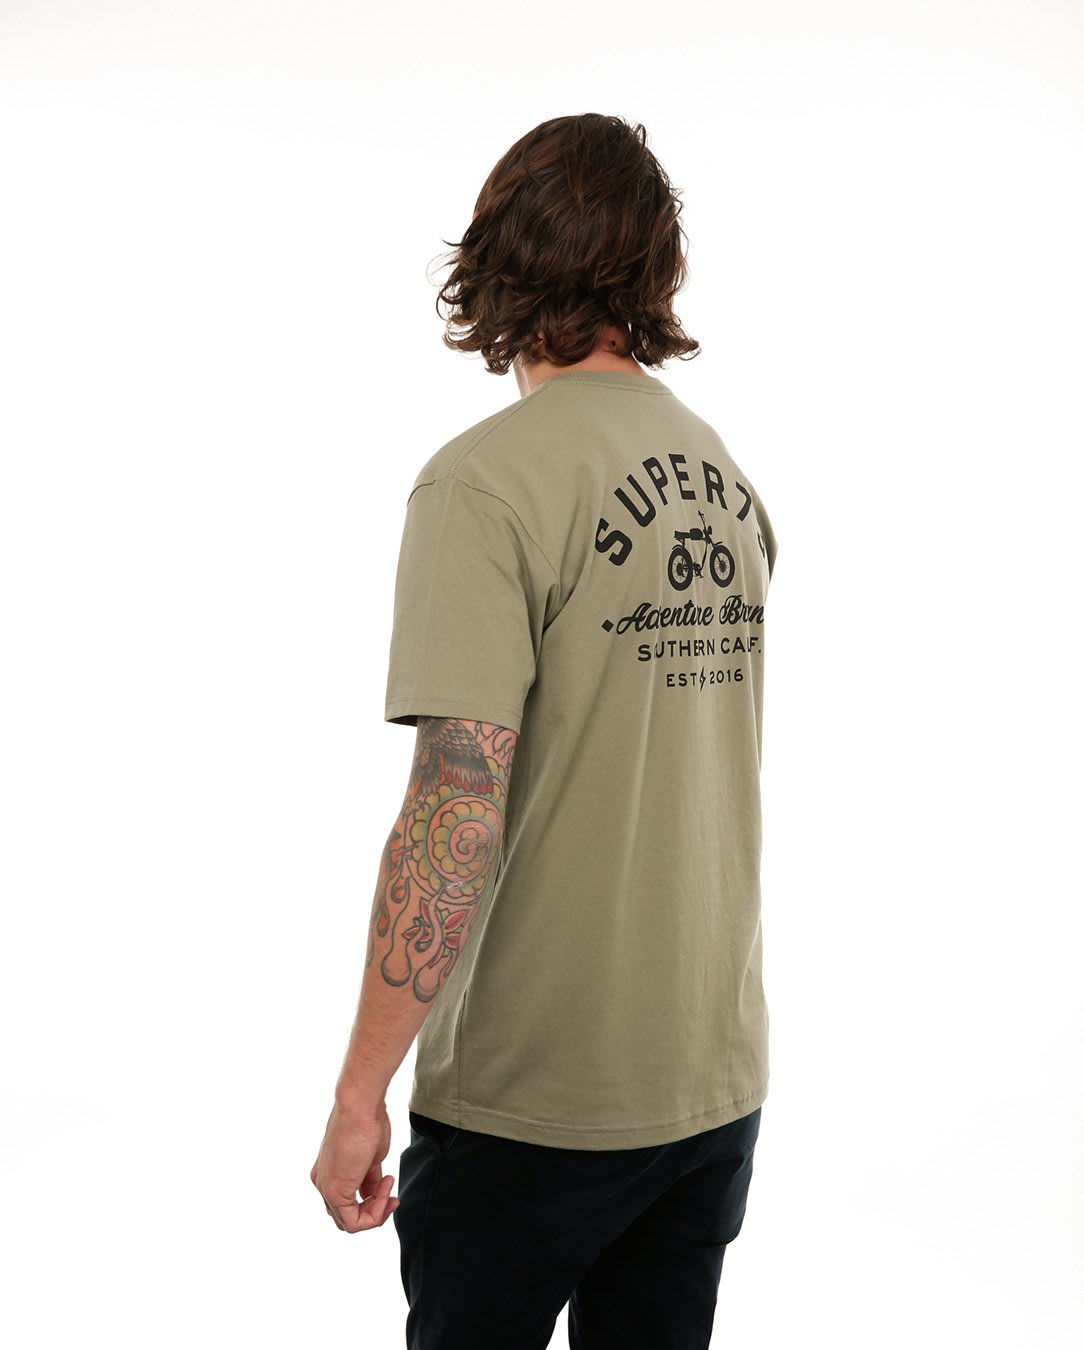 Side view of male model in Light olive Adventure Short Sleeve T-Shirt on white background.